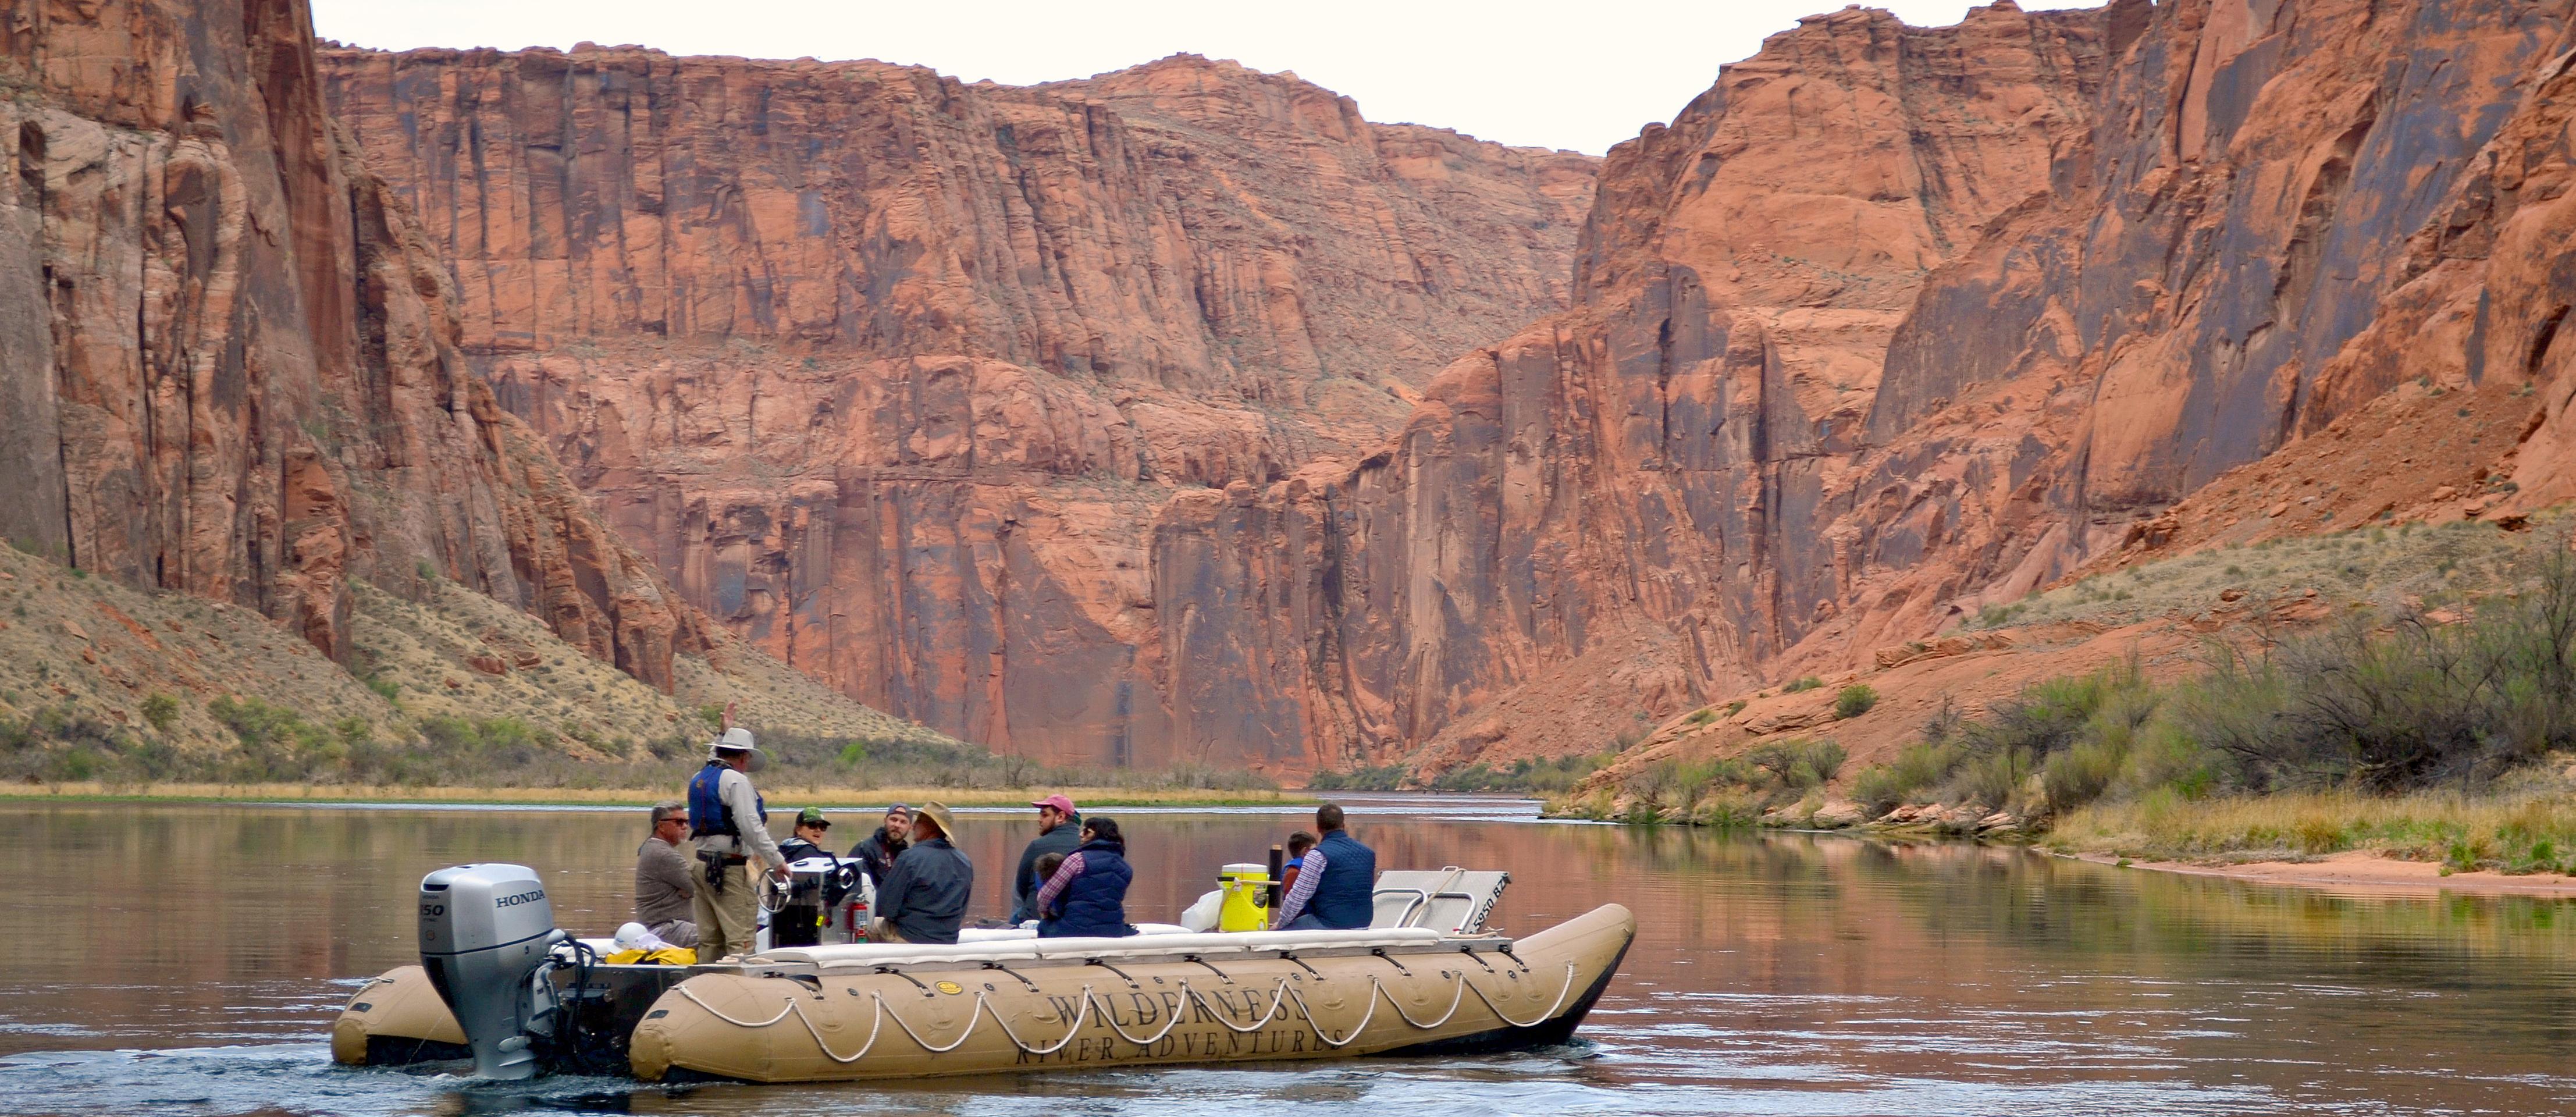 Motor Boat Rafting on the Colorado at Glen Canyon and Horseshoe Bend - Half Day Departing from Page